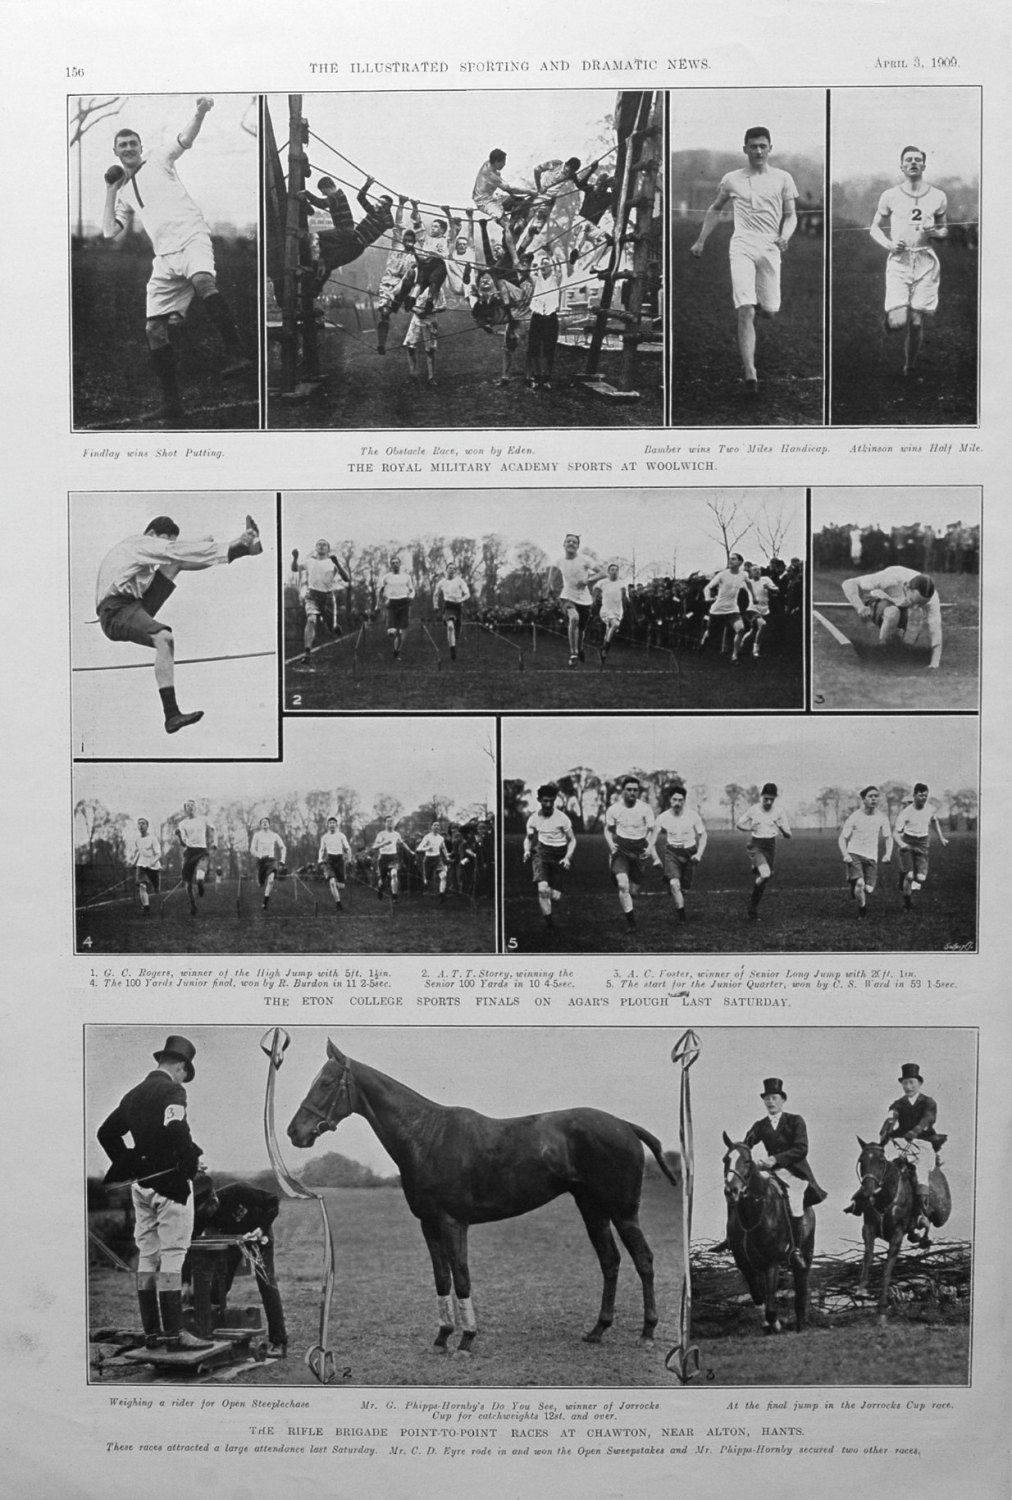 The Eton College Sports Finals on Agar's Plough. 1909.